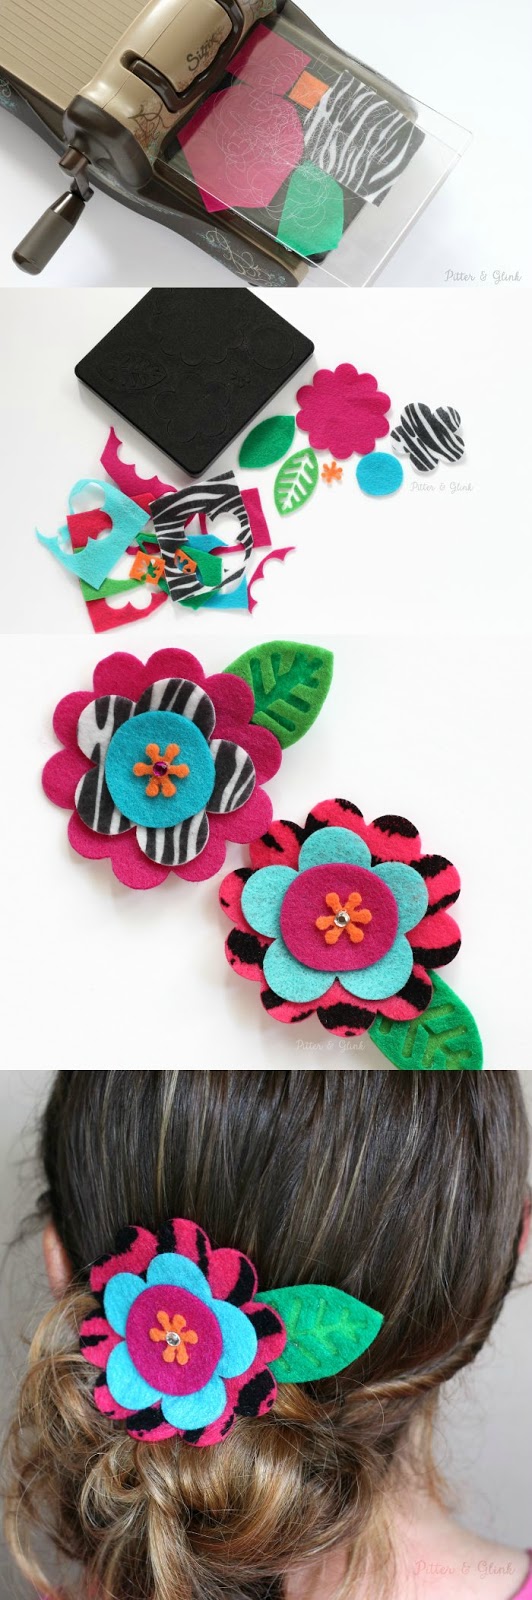 Handmade Felt Flower Hair Clips--The perfect inexpensive accessory for the little girl in your life! www.pitterandglink.com